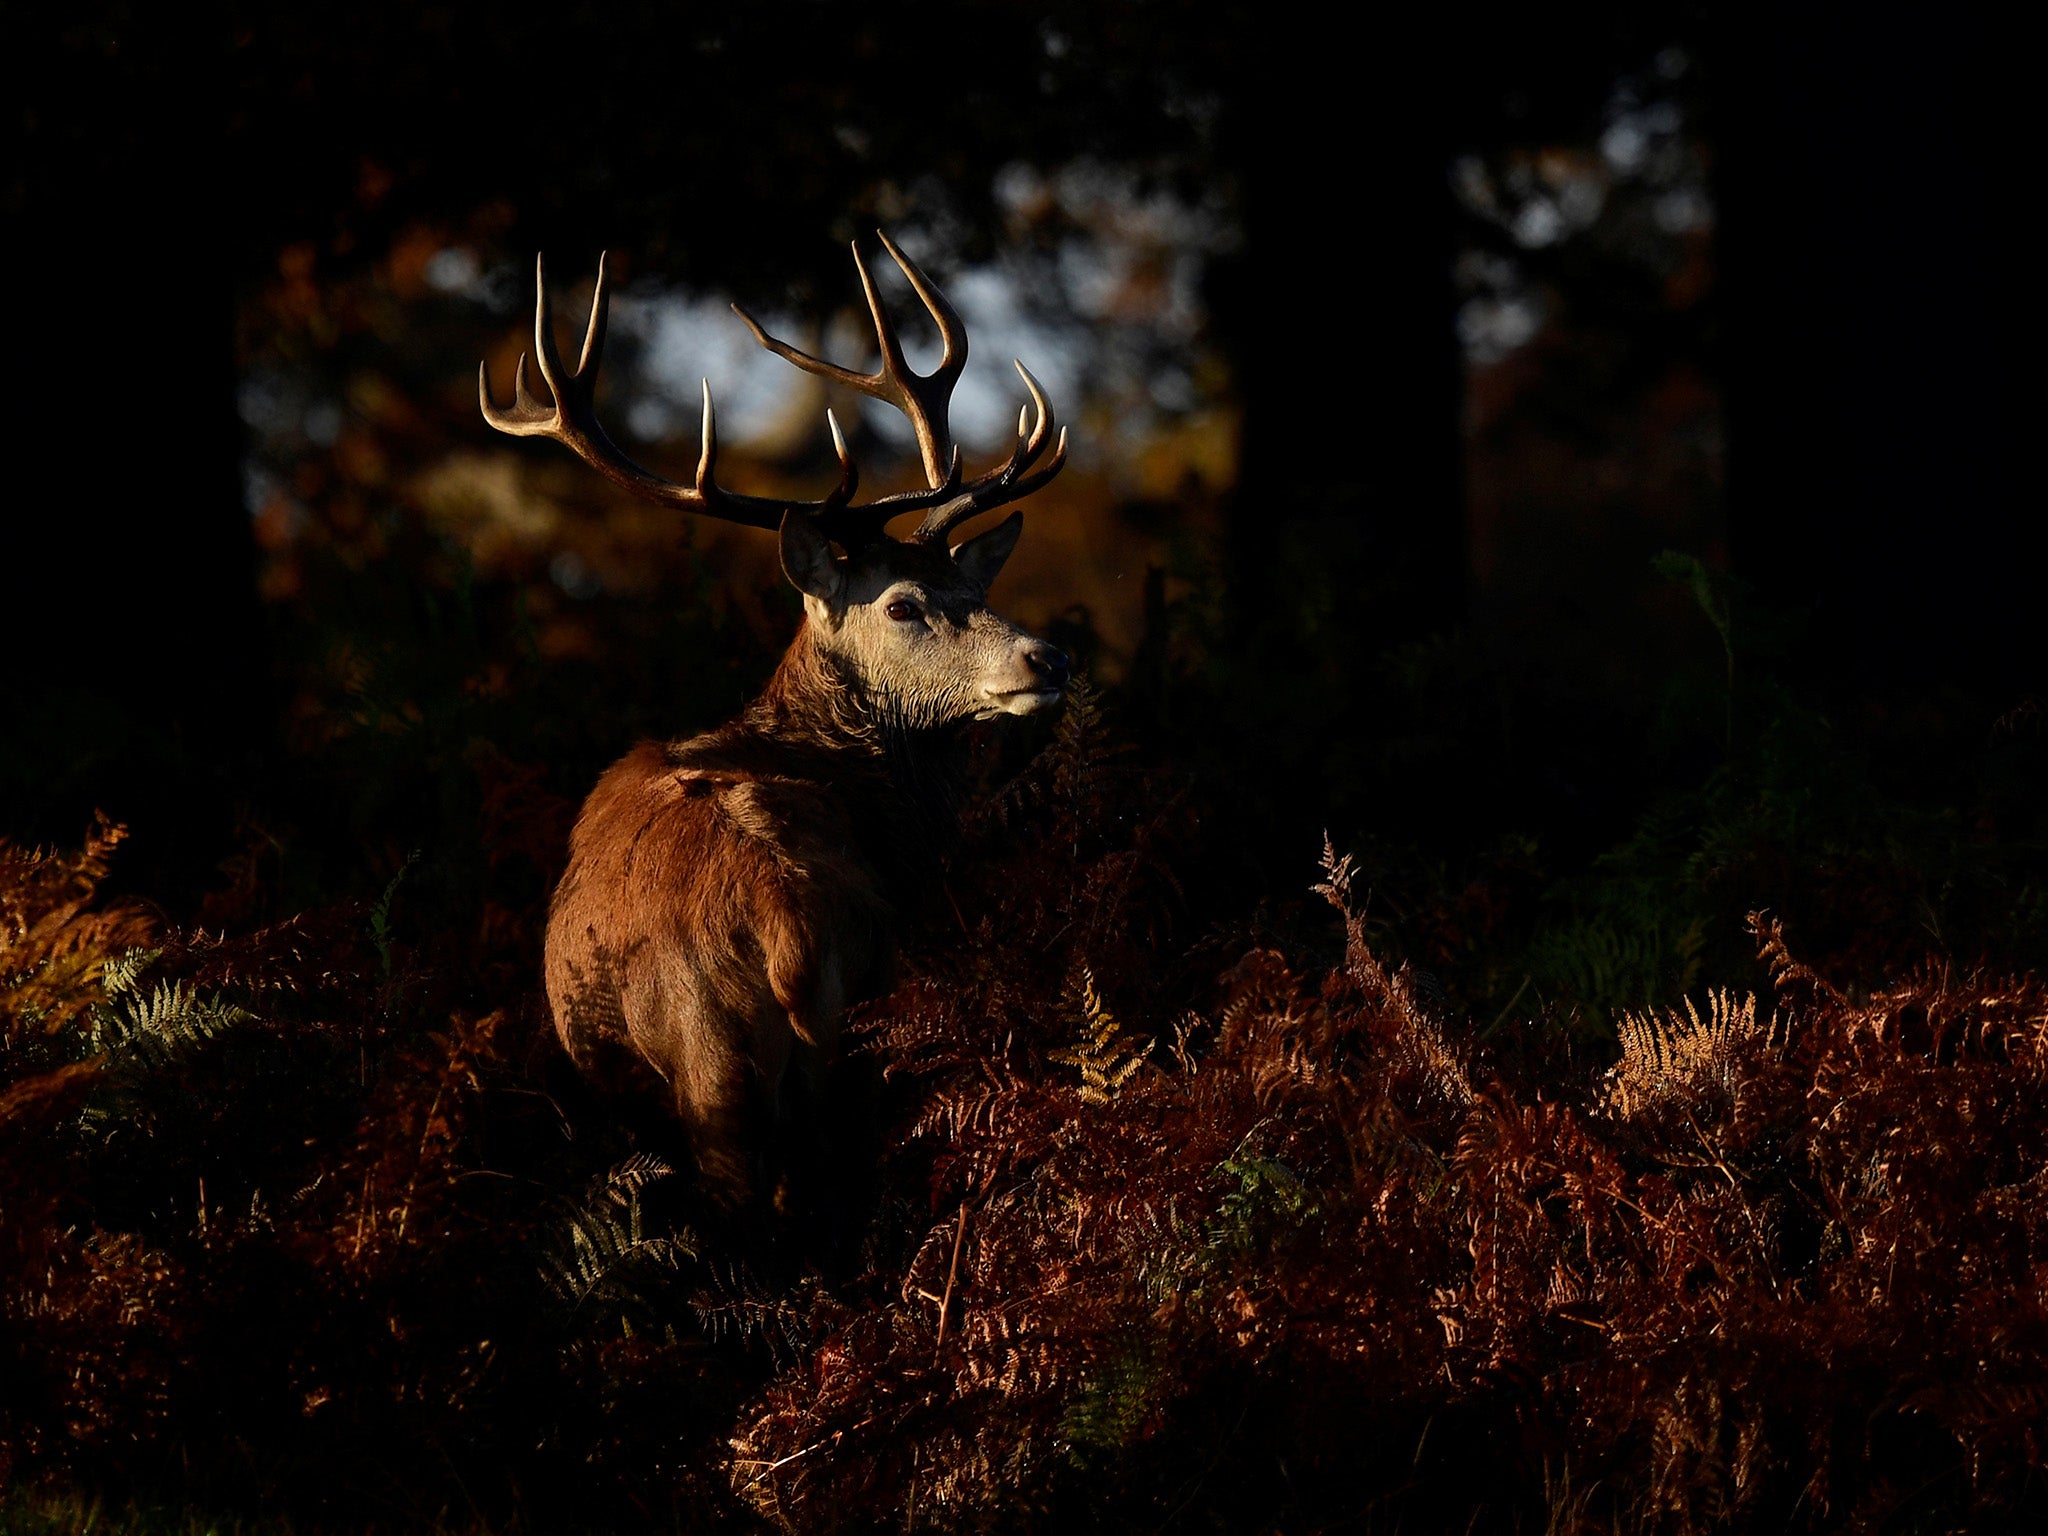 Bucks (or stags) are mainly shot in late summer